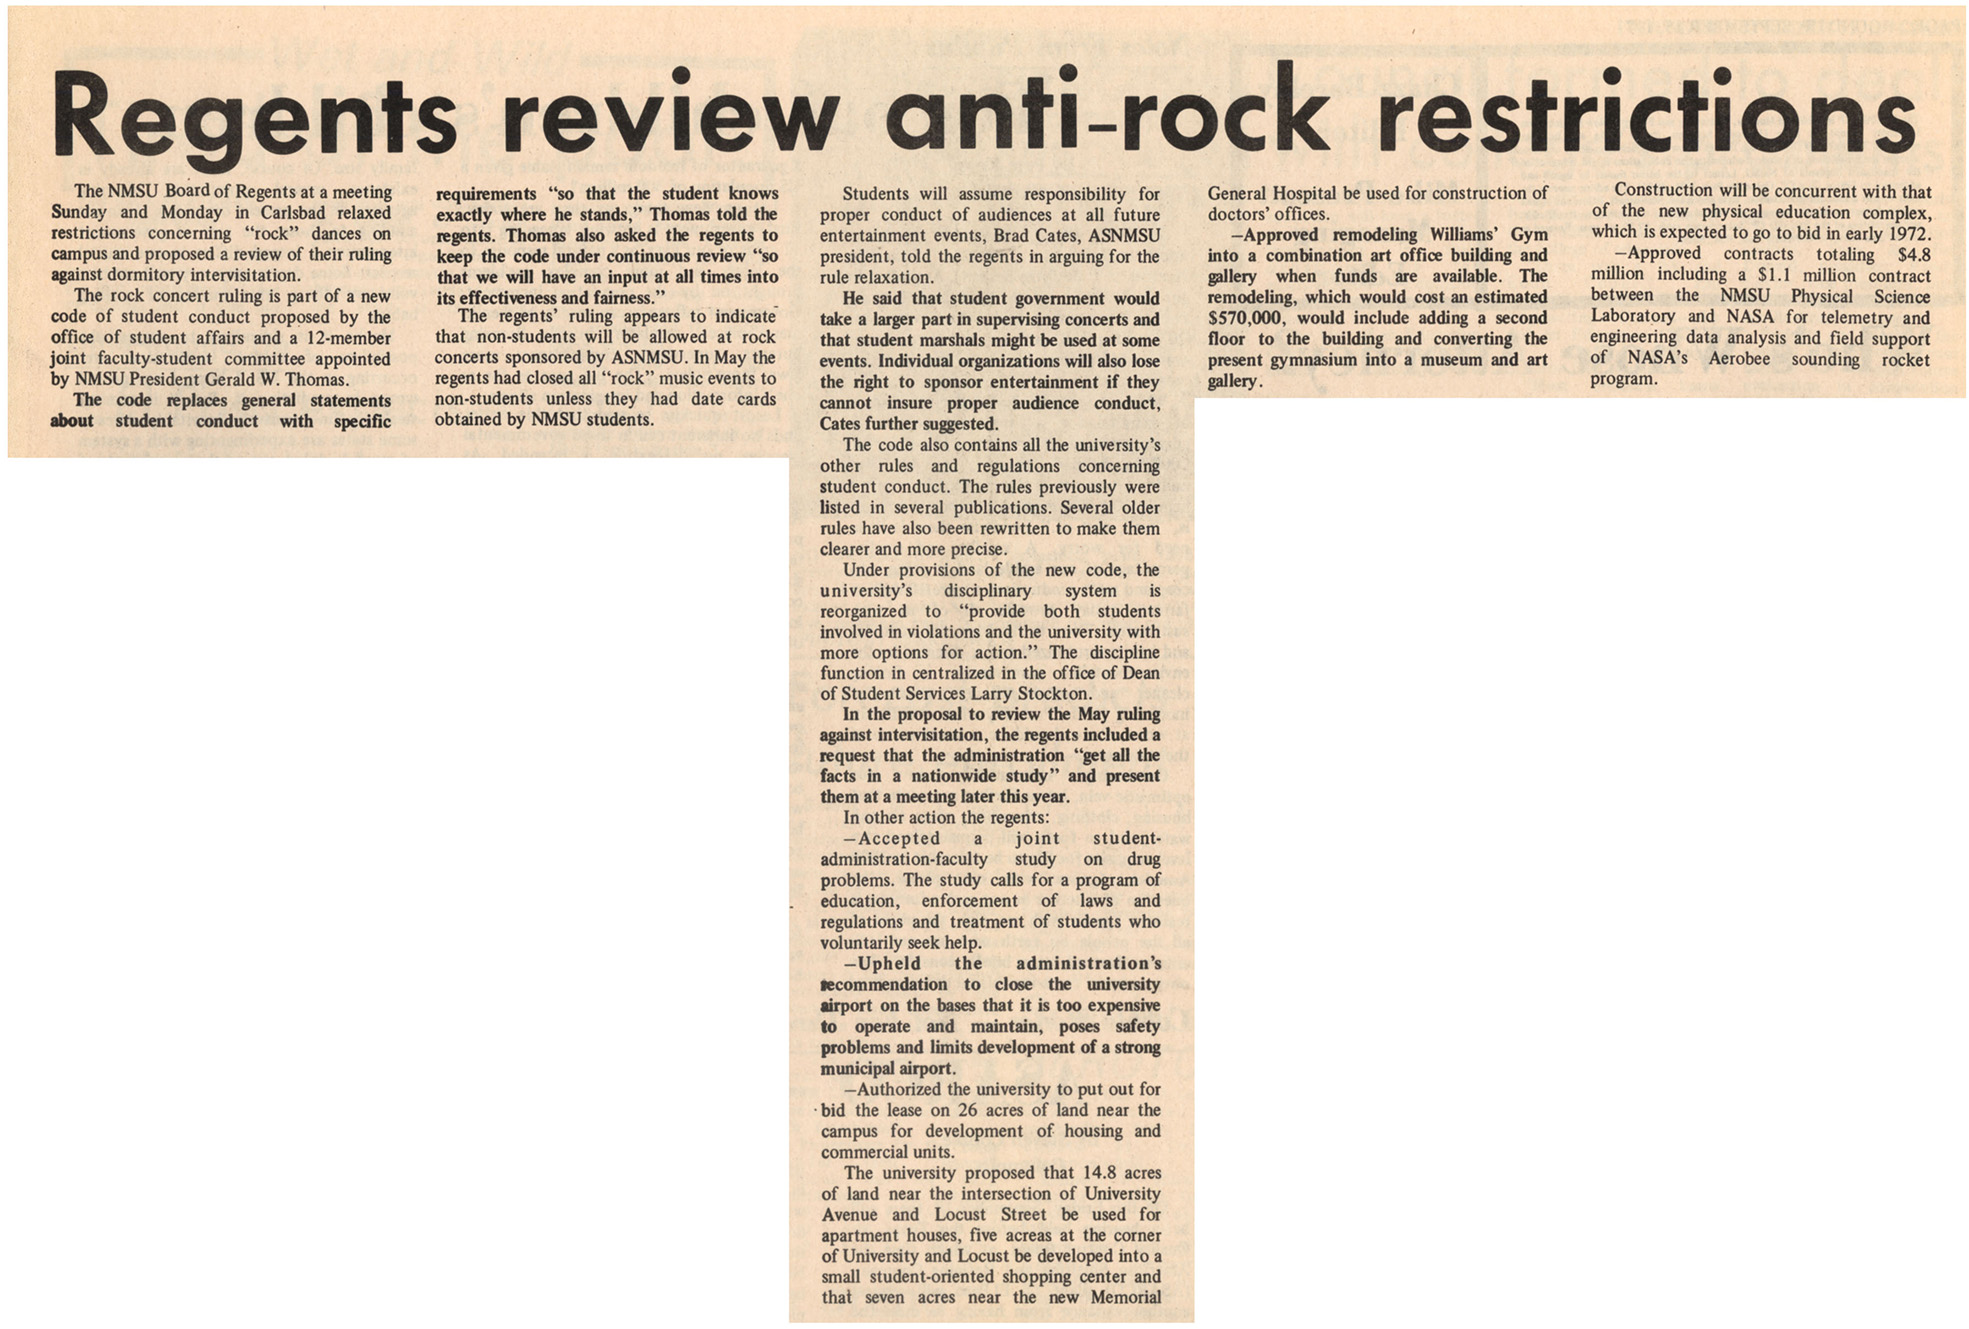 newspaper clipping for article titled Regents review anti-rock restrictions